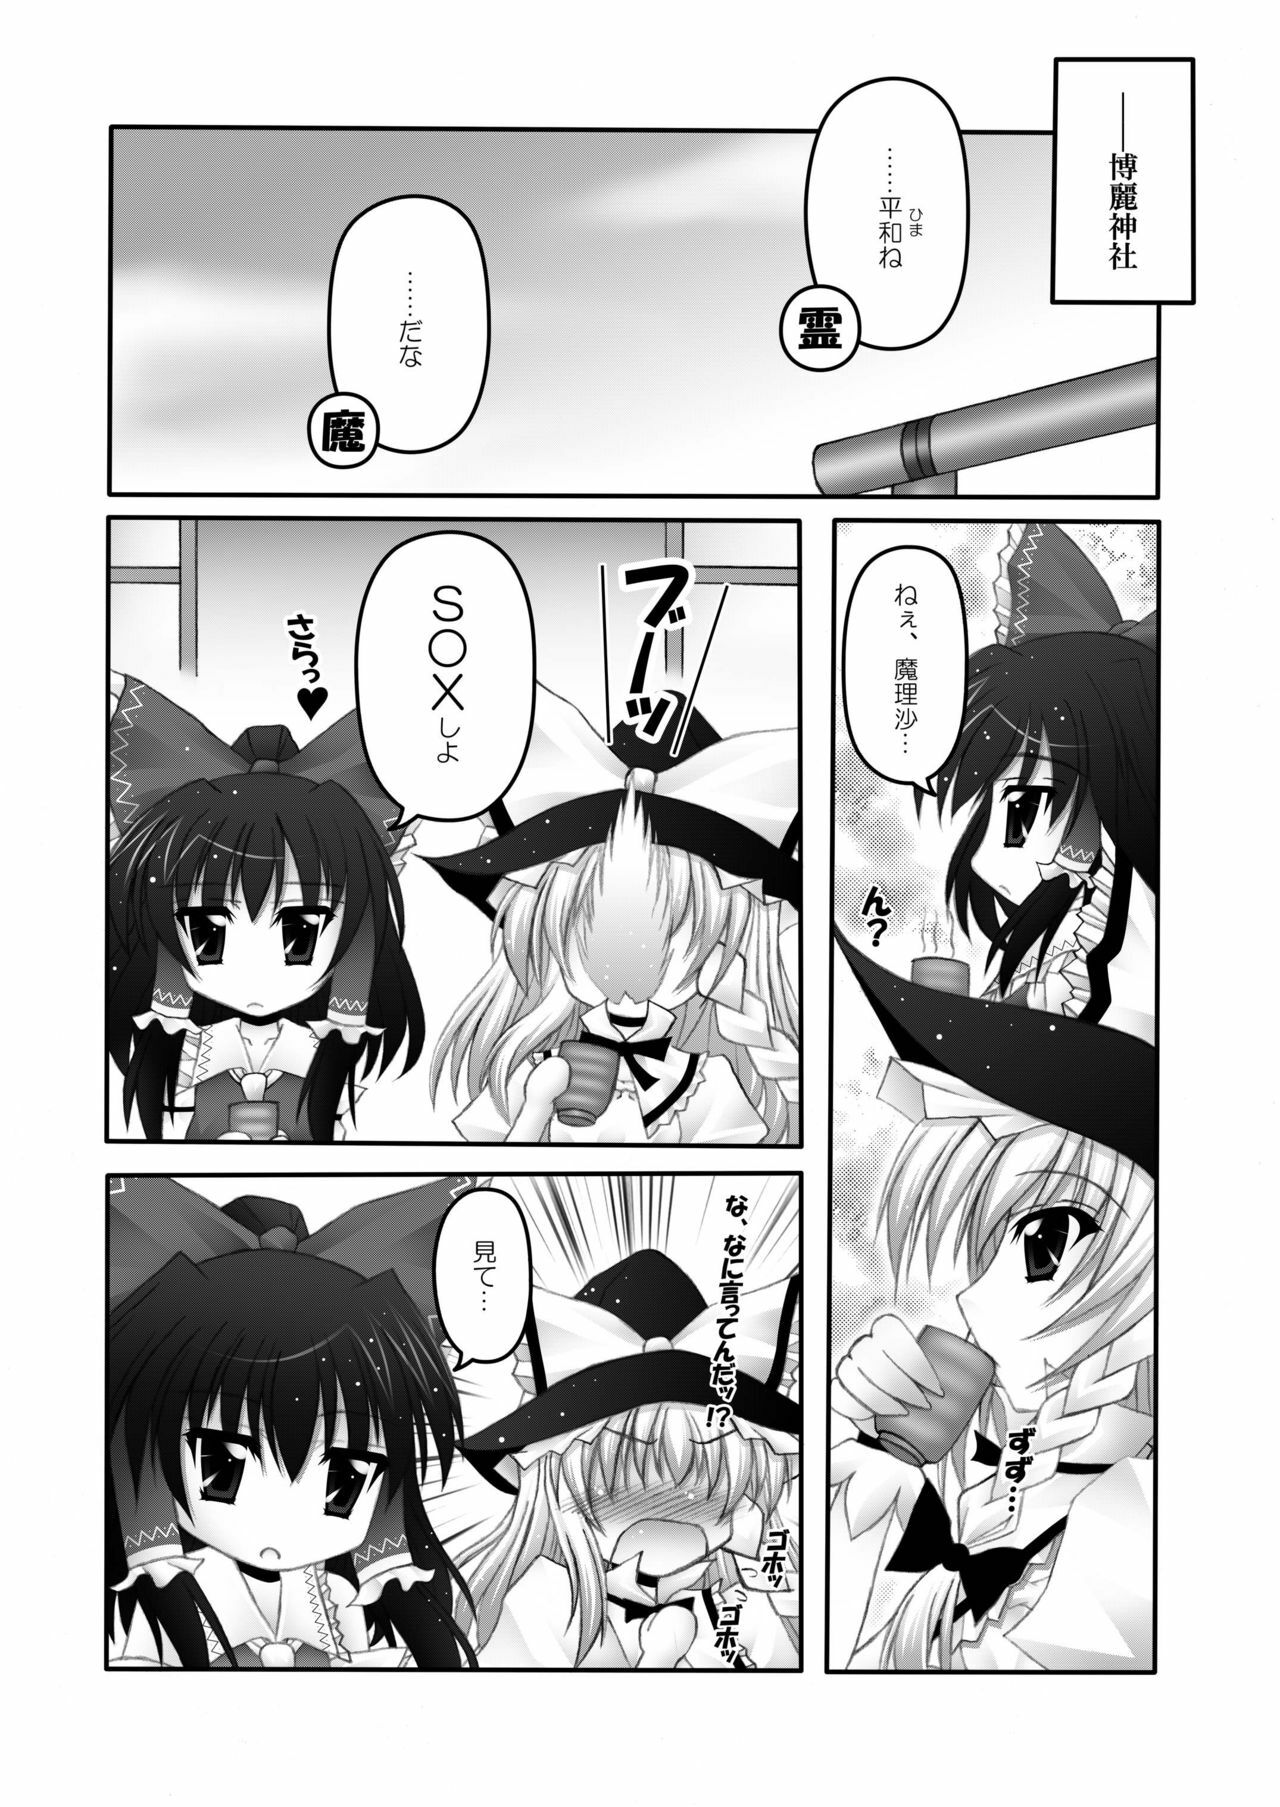 [Chronicle (YUKITO)] Only my wizard (Touhou Project) [Digital] page 19 full